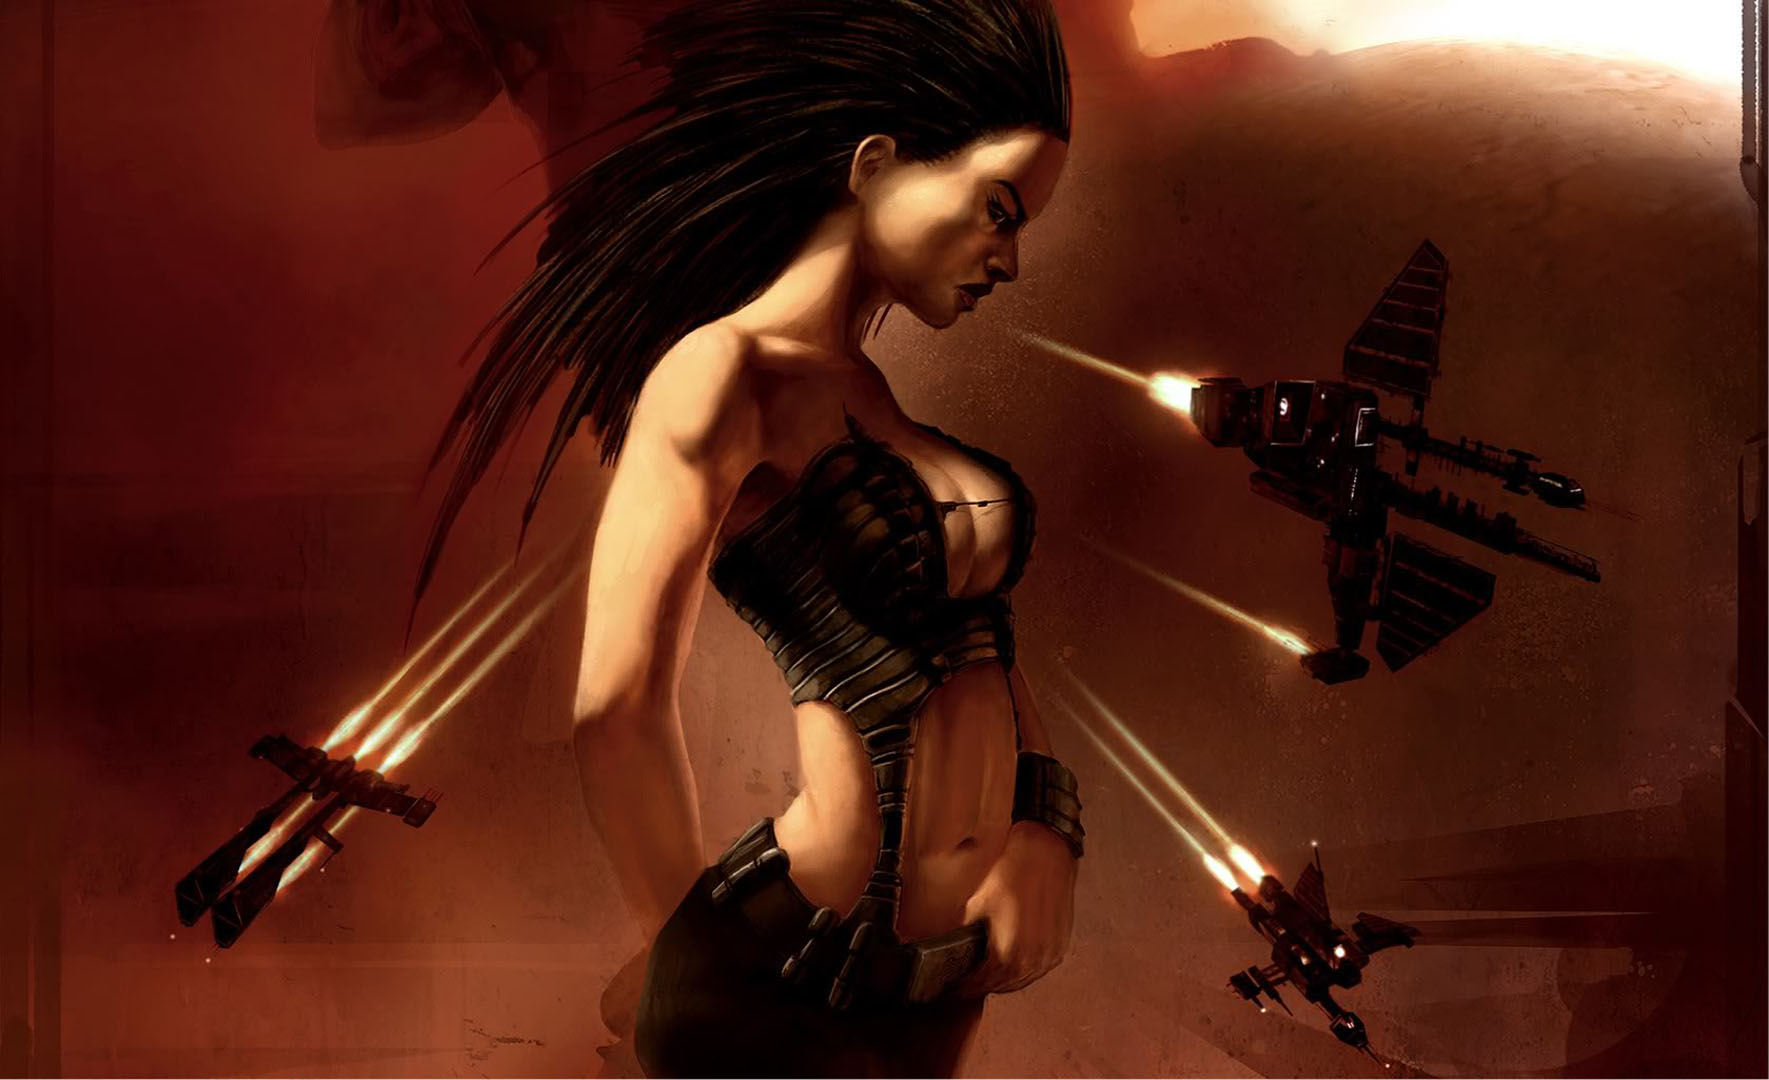 Girl And Spaceships Rpg Games Wallpaper Image Featuring Eve Online